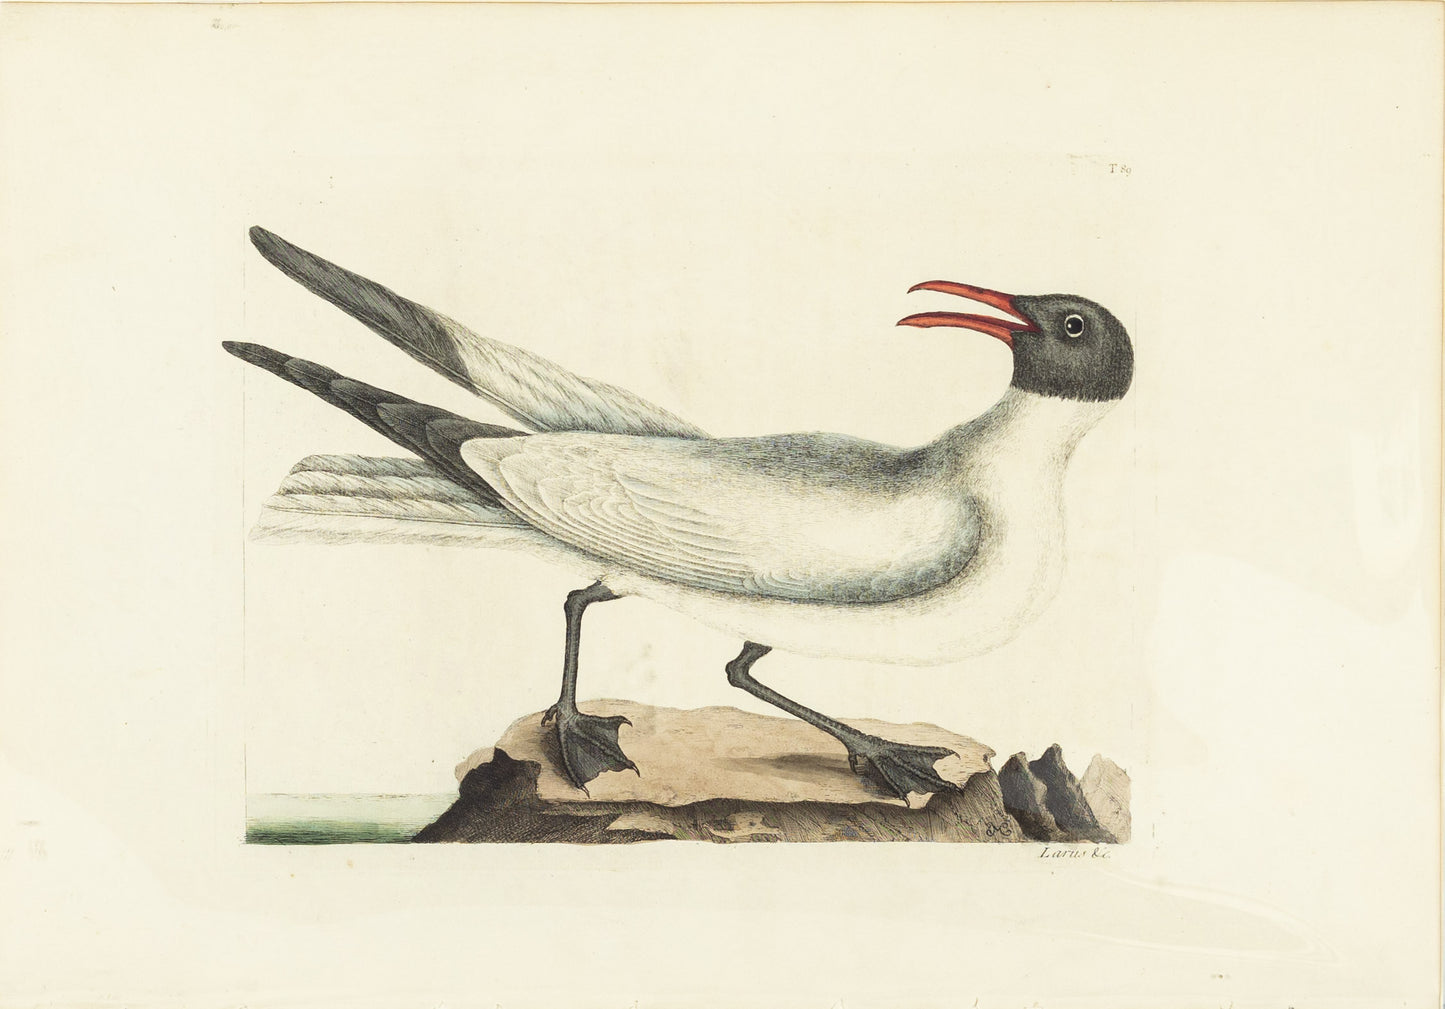 Catesby, Mark. Vol.I, Tab. 89, The Laughing Gull